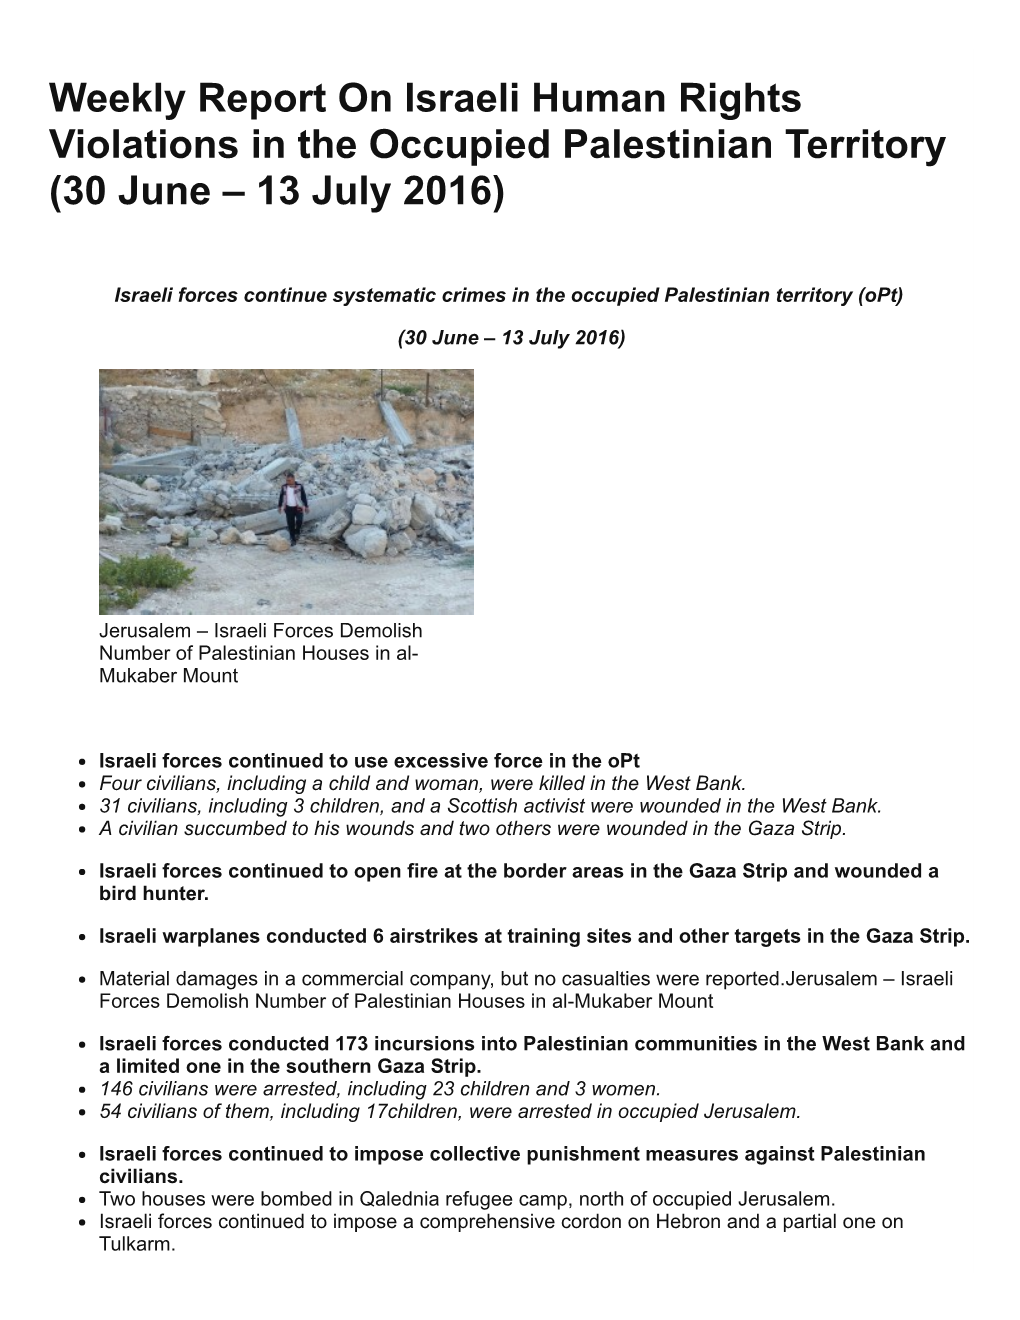 Weekly Report on Israeli Human Rights Violations in the Occupied Palestinian Territory (30 June – 13 July 2016)